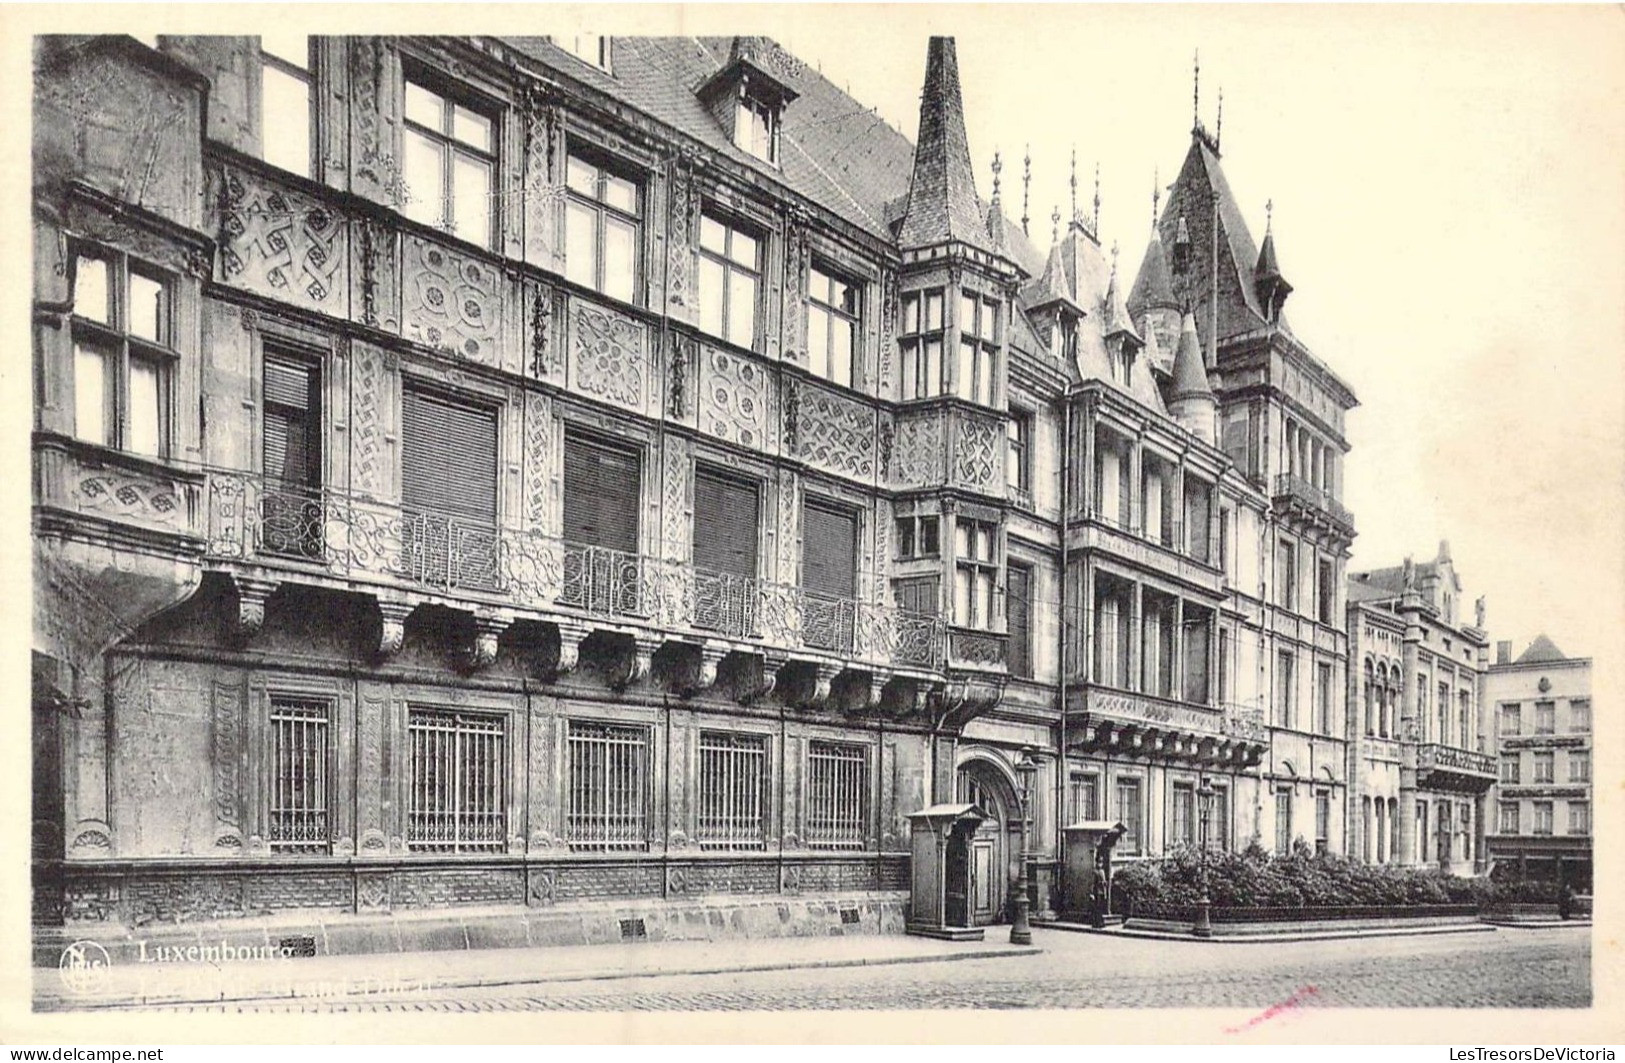 LUXEMBOURG - Le Palais - Grand Ditcat - Carte Postale Ancienne - Luxemburg - Stad